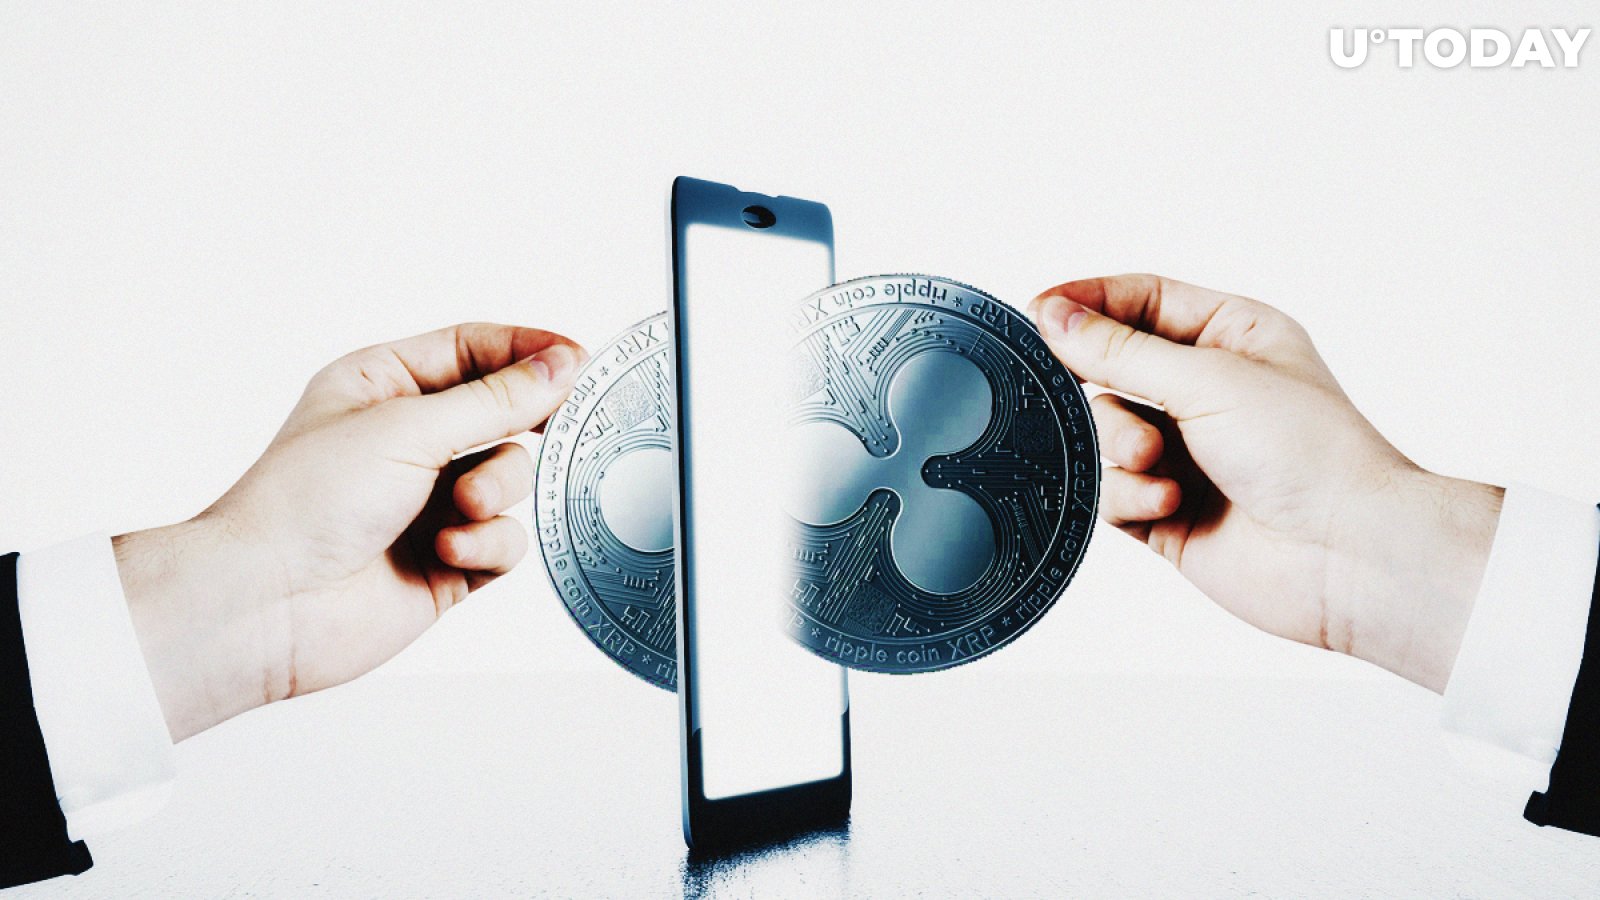 250 Mln XRP Transferred Between Bithumb Wallets as XRP Liquidity in USD Corridor Spikes